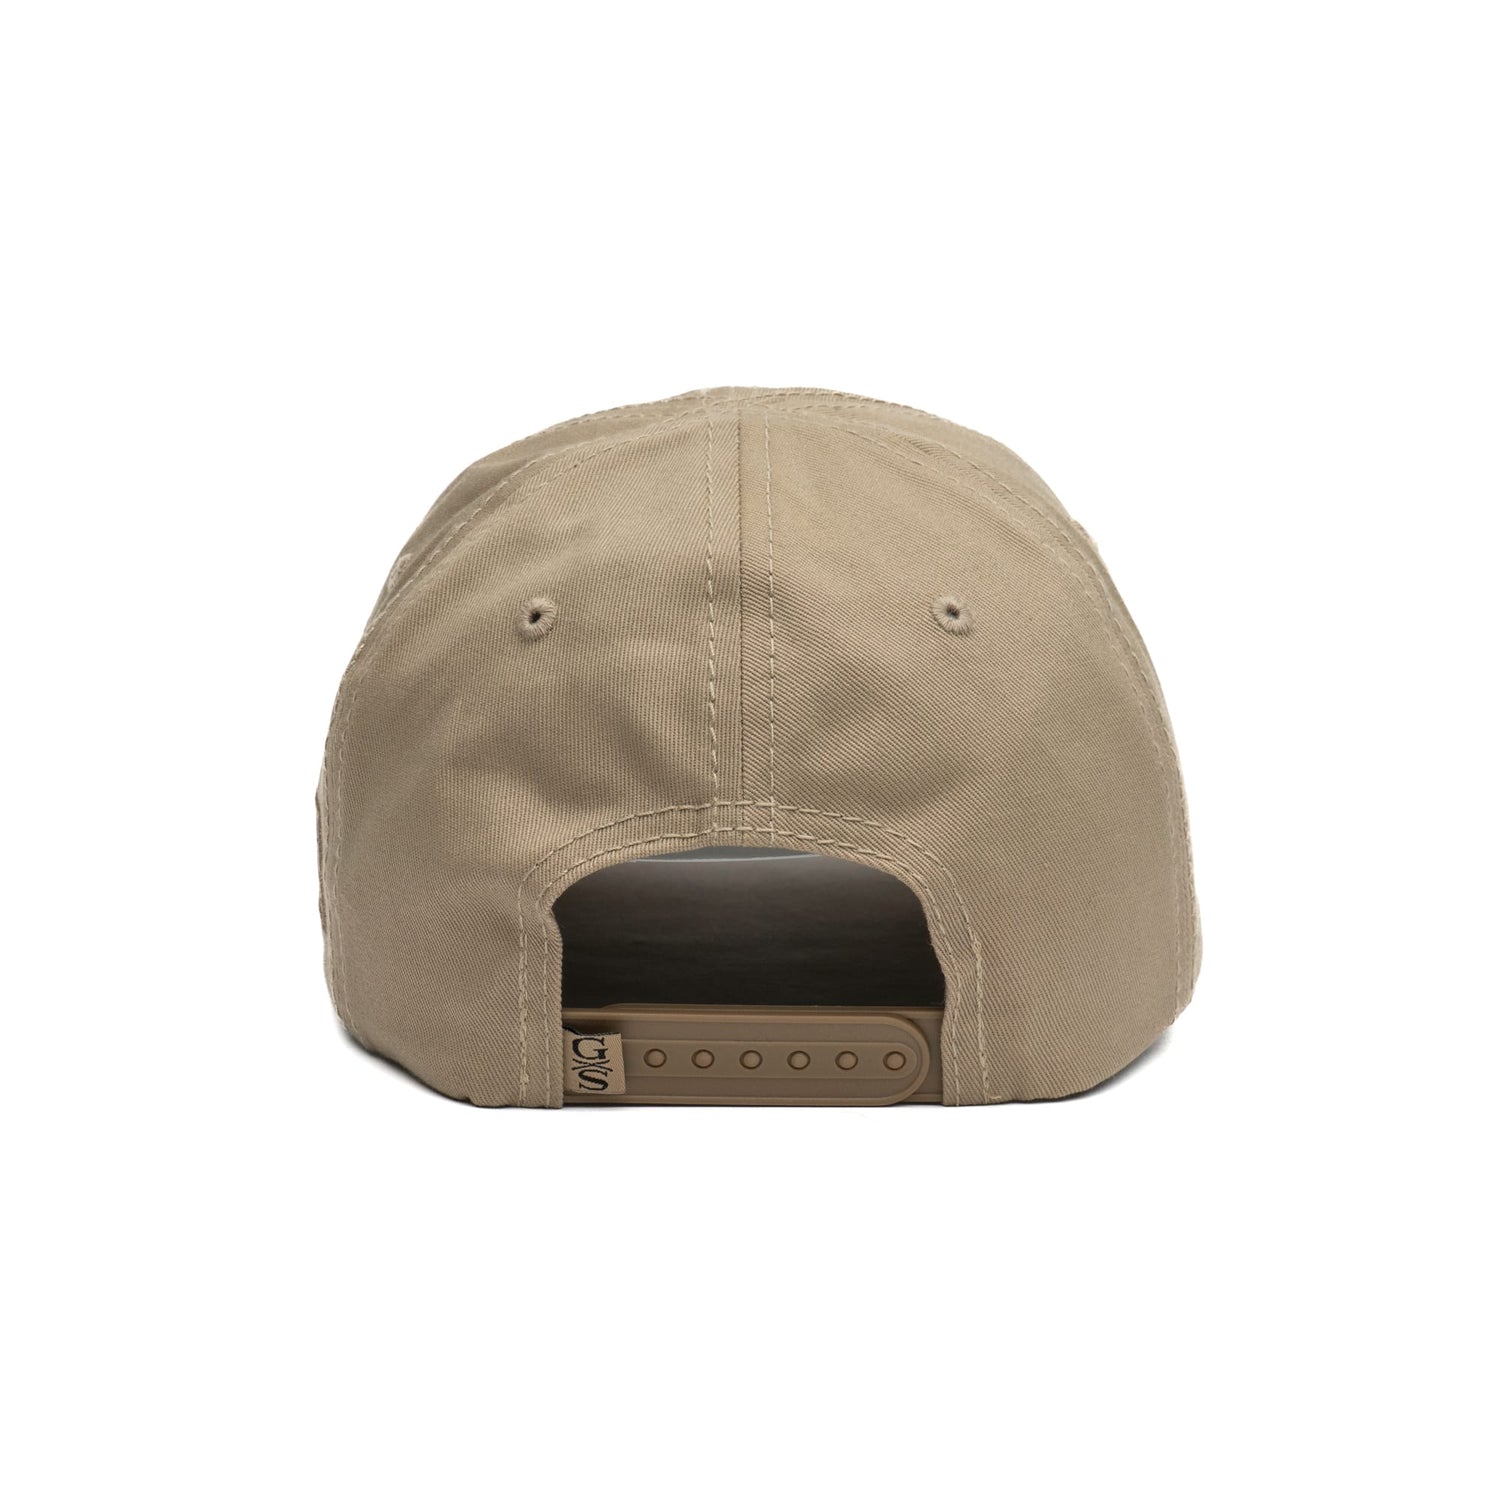 Grunt Style Operator Hat for Men in Tan | Grunt Style